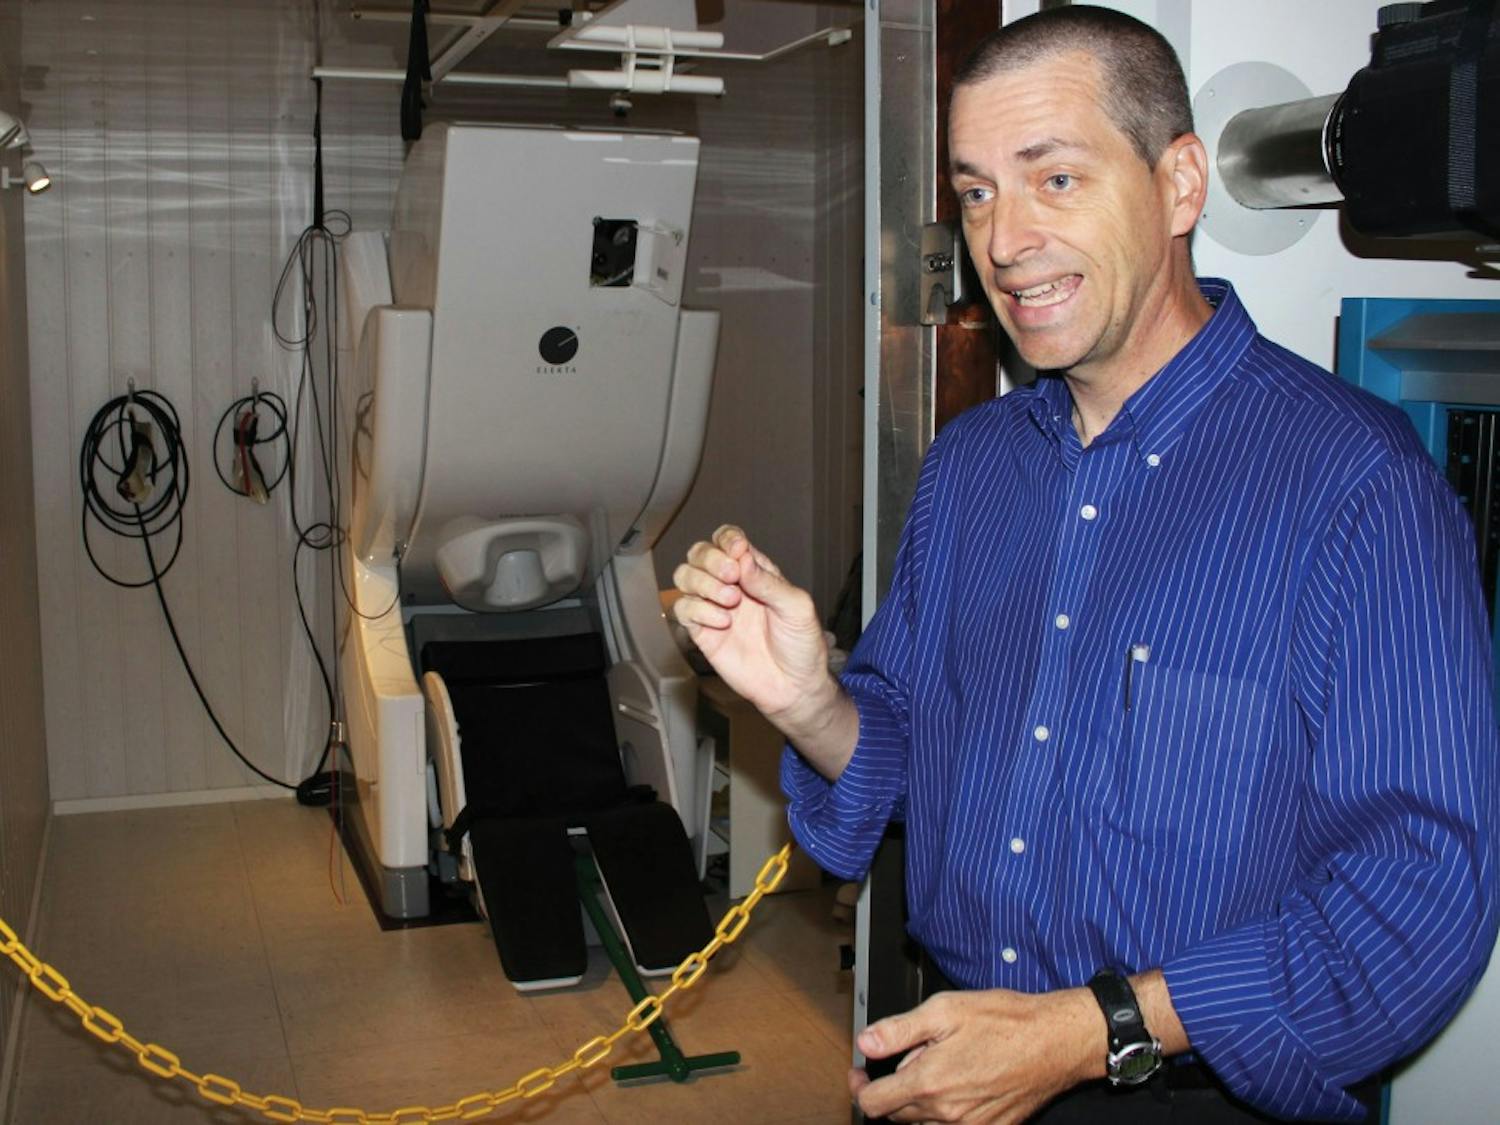 Vince Calhoun explains how a magneto encephalography (MEG) machine operates. Magneto encephalography (MEG) which is, equipment that measures the magnetic field changes produced by bundles of neurons firing in the brain.